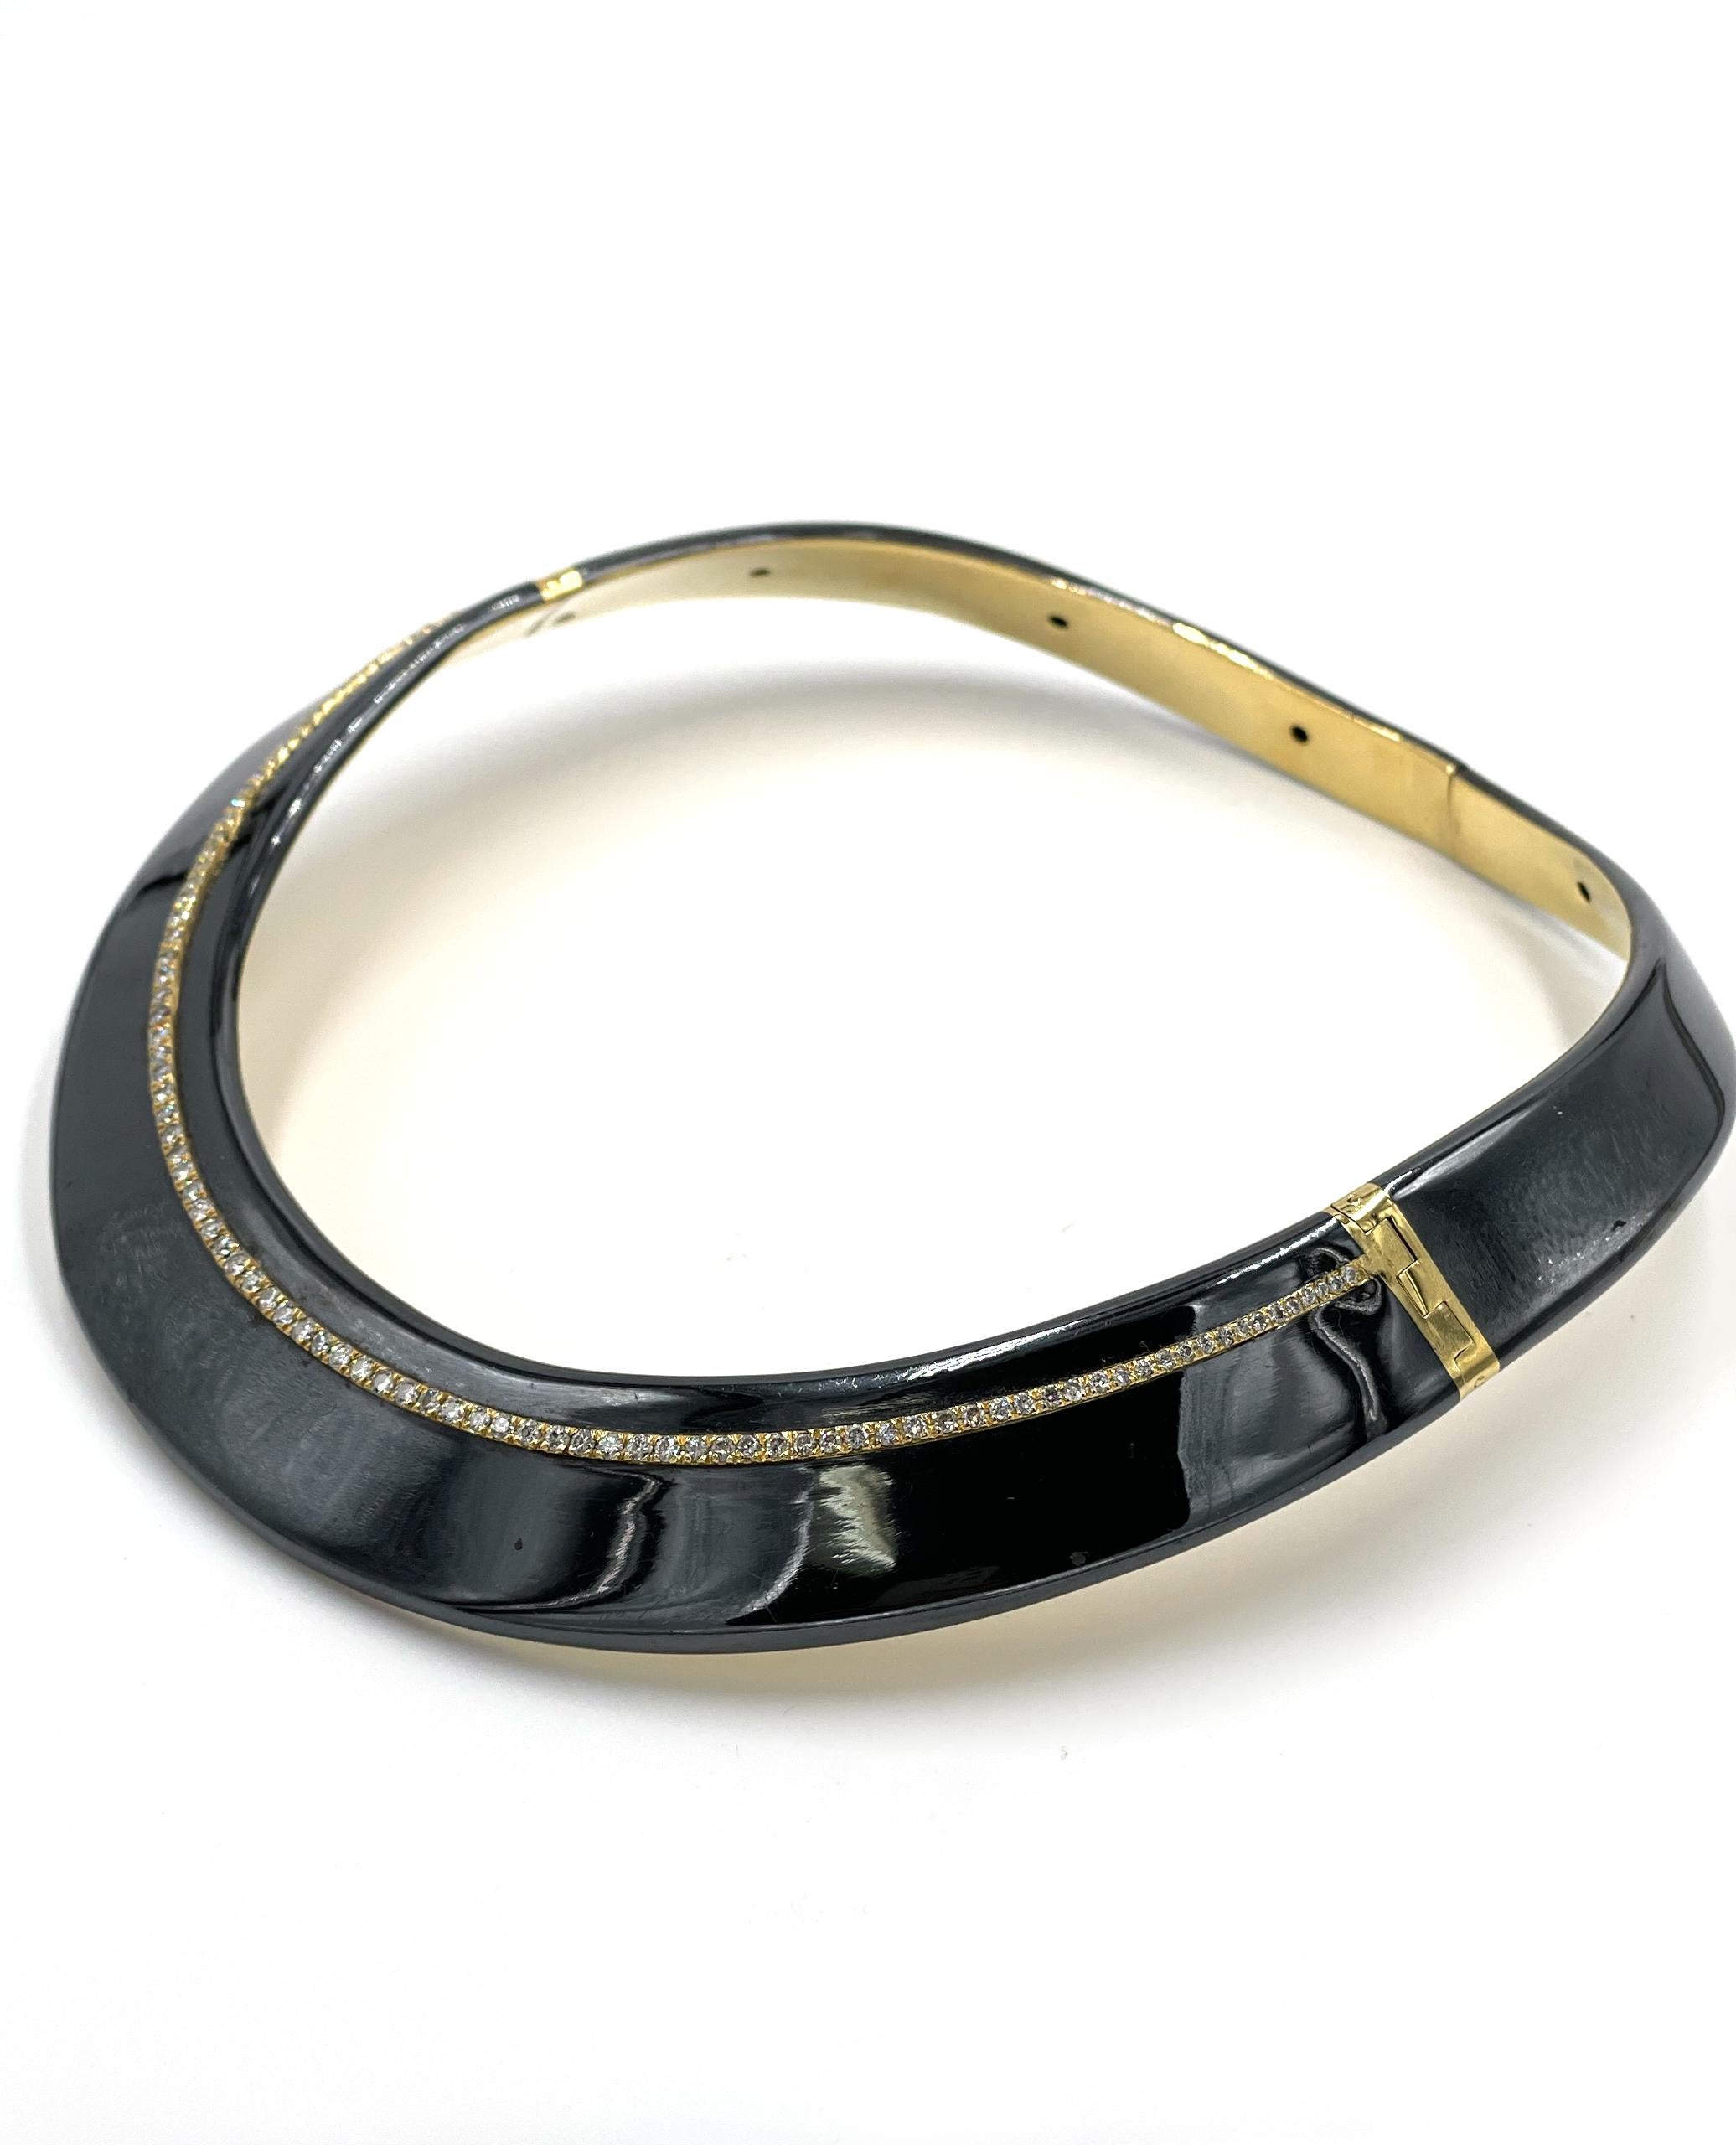 Pre owned vintage estate 18K yellow gold collar necklace with black enamel and diamonds.  The heavy weight hollow collar is hinged on the sides and slightly oval shaped to fit the curve of the neckline.  The front is set with 97 round brilliant-cut